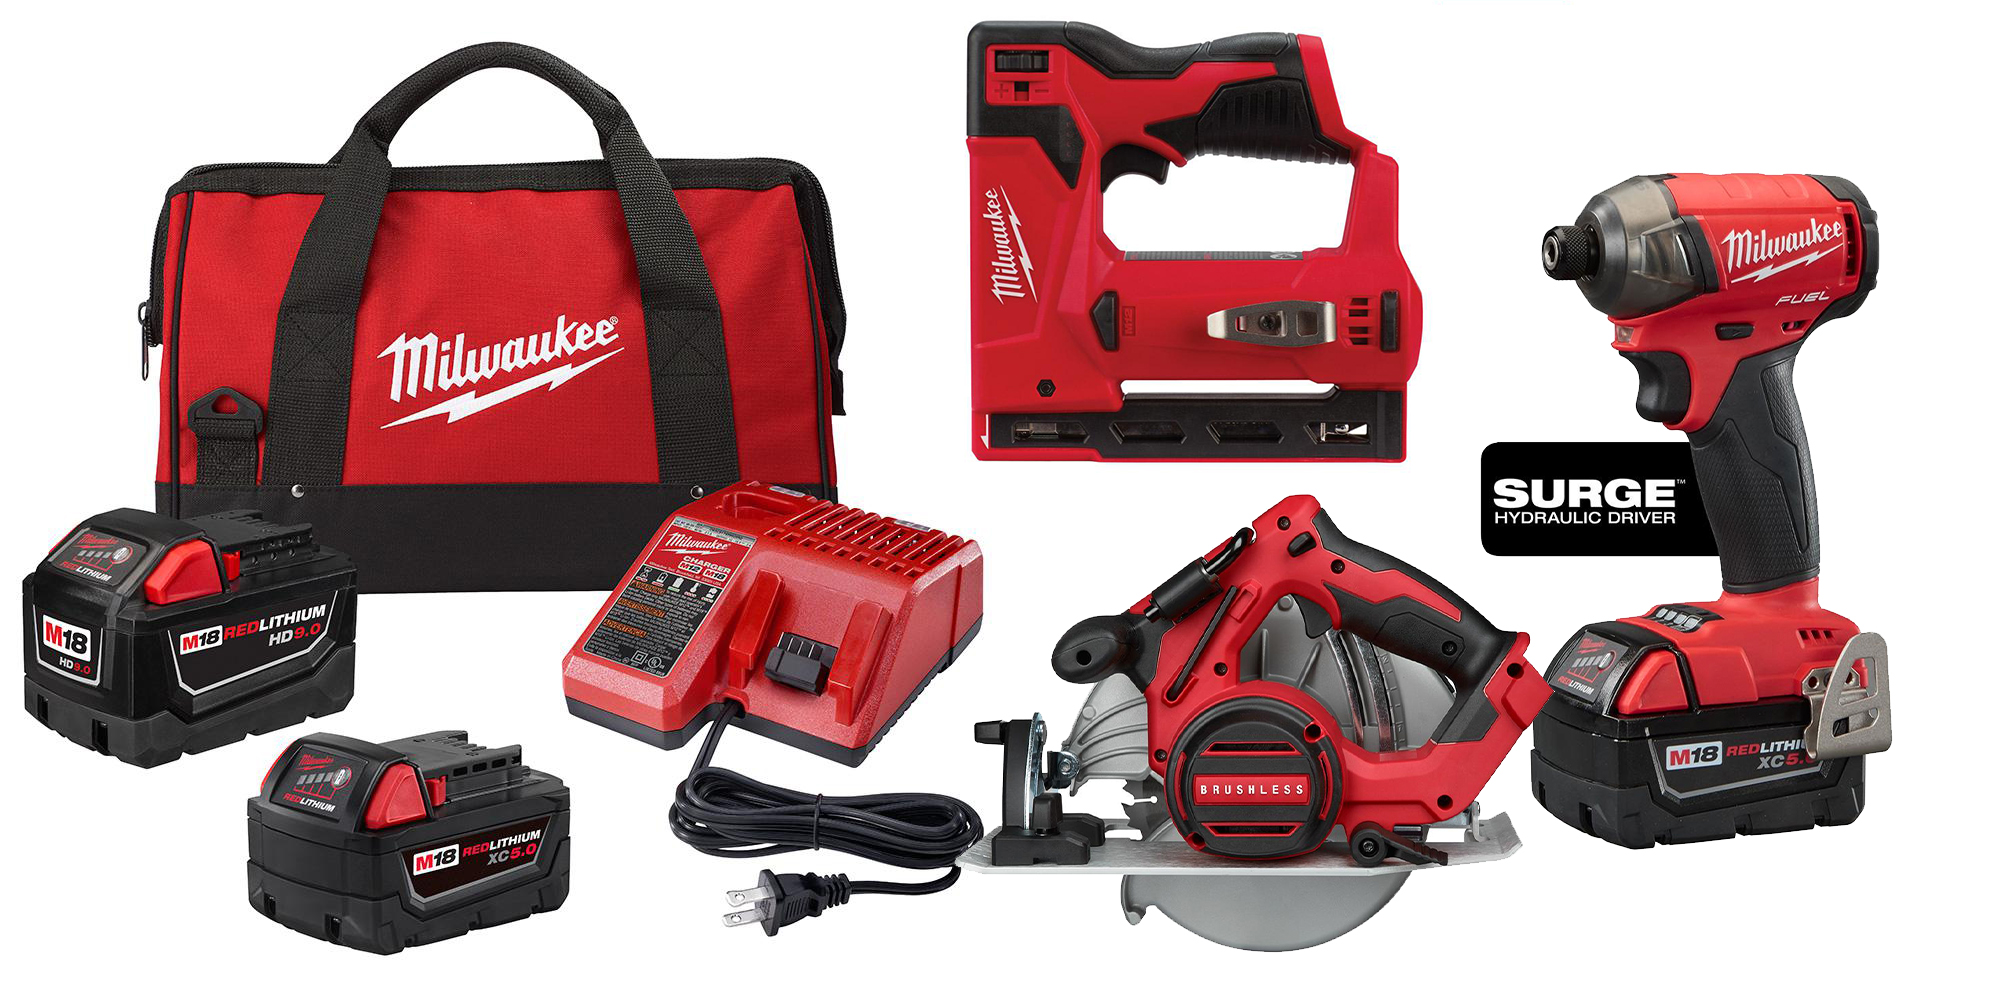 Home Depot S New Milwaukee Tool Sale Starts At 99 With Bonus Accessories 9to5toys